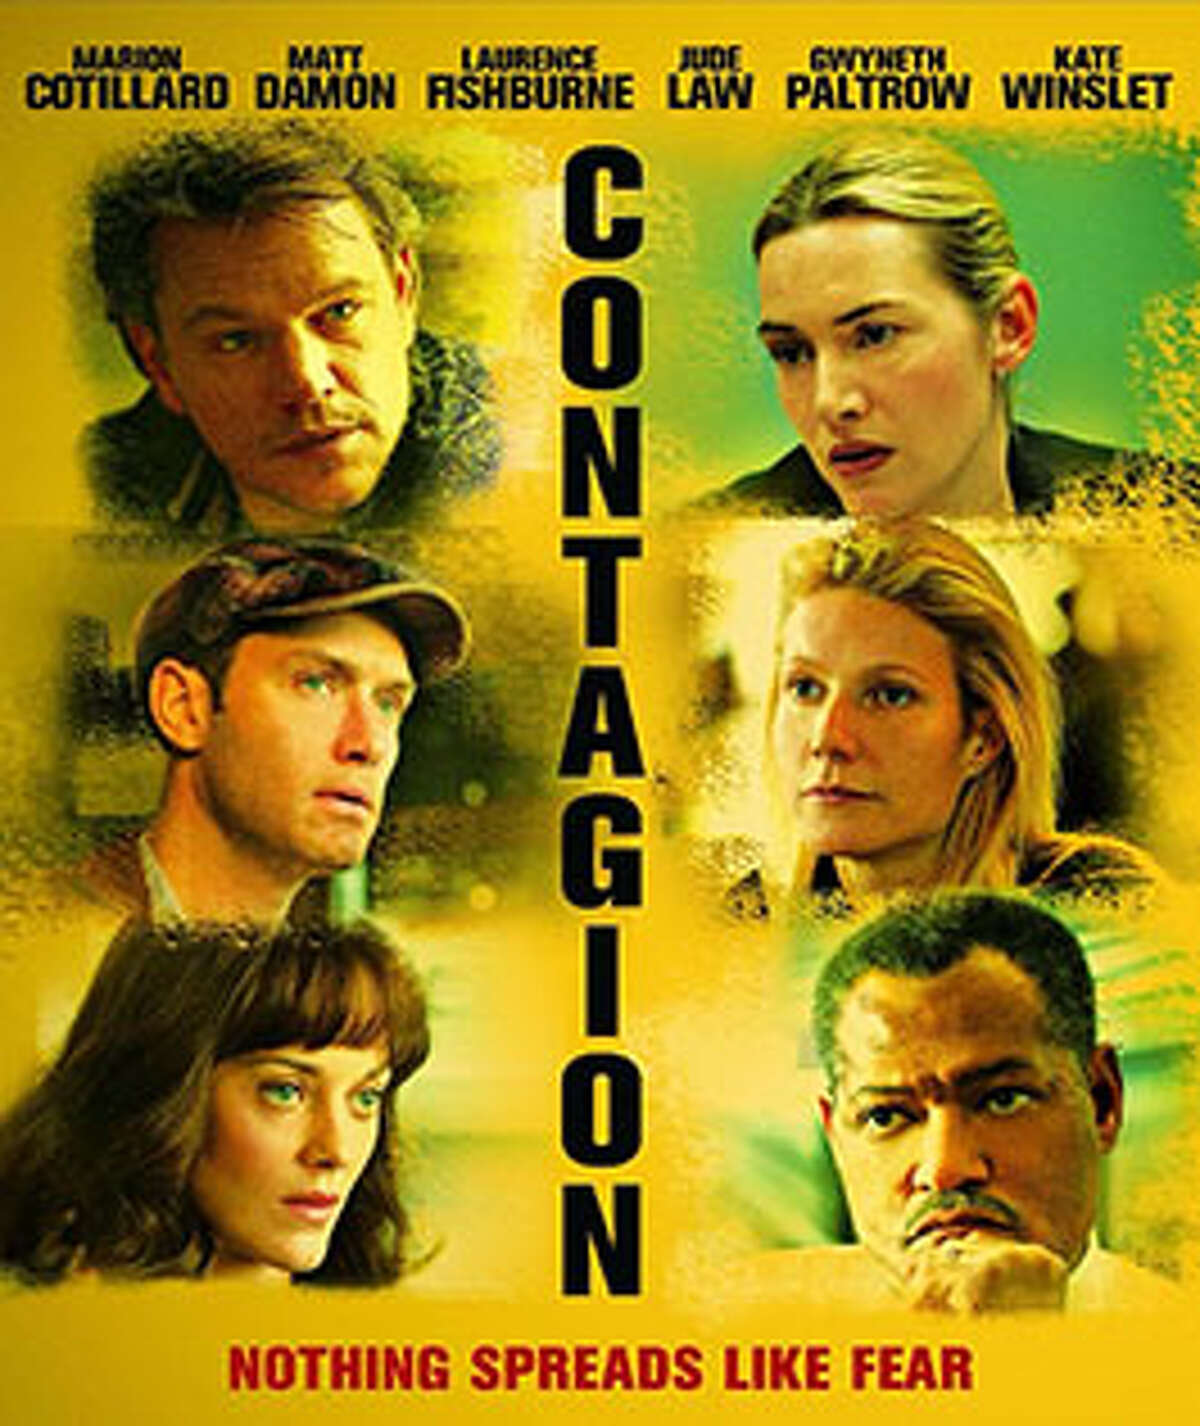 Contagion (2011)Stephen Soderberg’s 2011 thriller, starring an ensemble cast including Gwyneth Platrow, Matt Damon, Marillon Cotillard and Lawrence Fishburne, has already been the subject of viral articles and an excellent video by Dan Olson, so you probably knew it was going to show up on this list. That’s why it’s first. Now you can spend the rest of the article being surprised.I can’t find a movie more realistic, or anticipatory, than "Contagion." Like the COVID-19 pandemic, the virus in "Contagion" initially comes from a bat (and a pig). The greedy and dishonest spread lies about a fake “cure,” accuse the CDC of hiding information, and profit from it. A lot of people die before their time, and there are no answers as to why."Contagion" scored 84% of Rotten Tomatoes, making it Certified Fresh, and is available to rent on Amazon for $3.99.